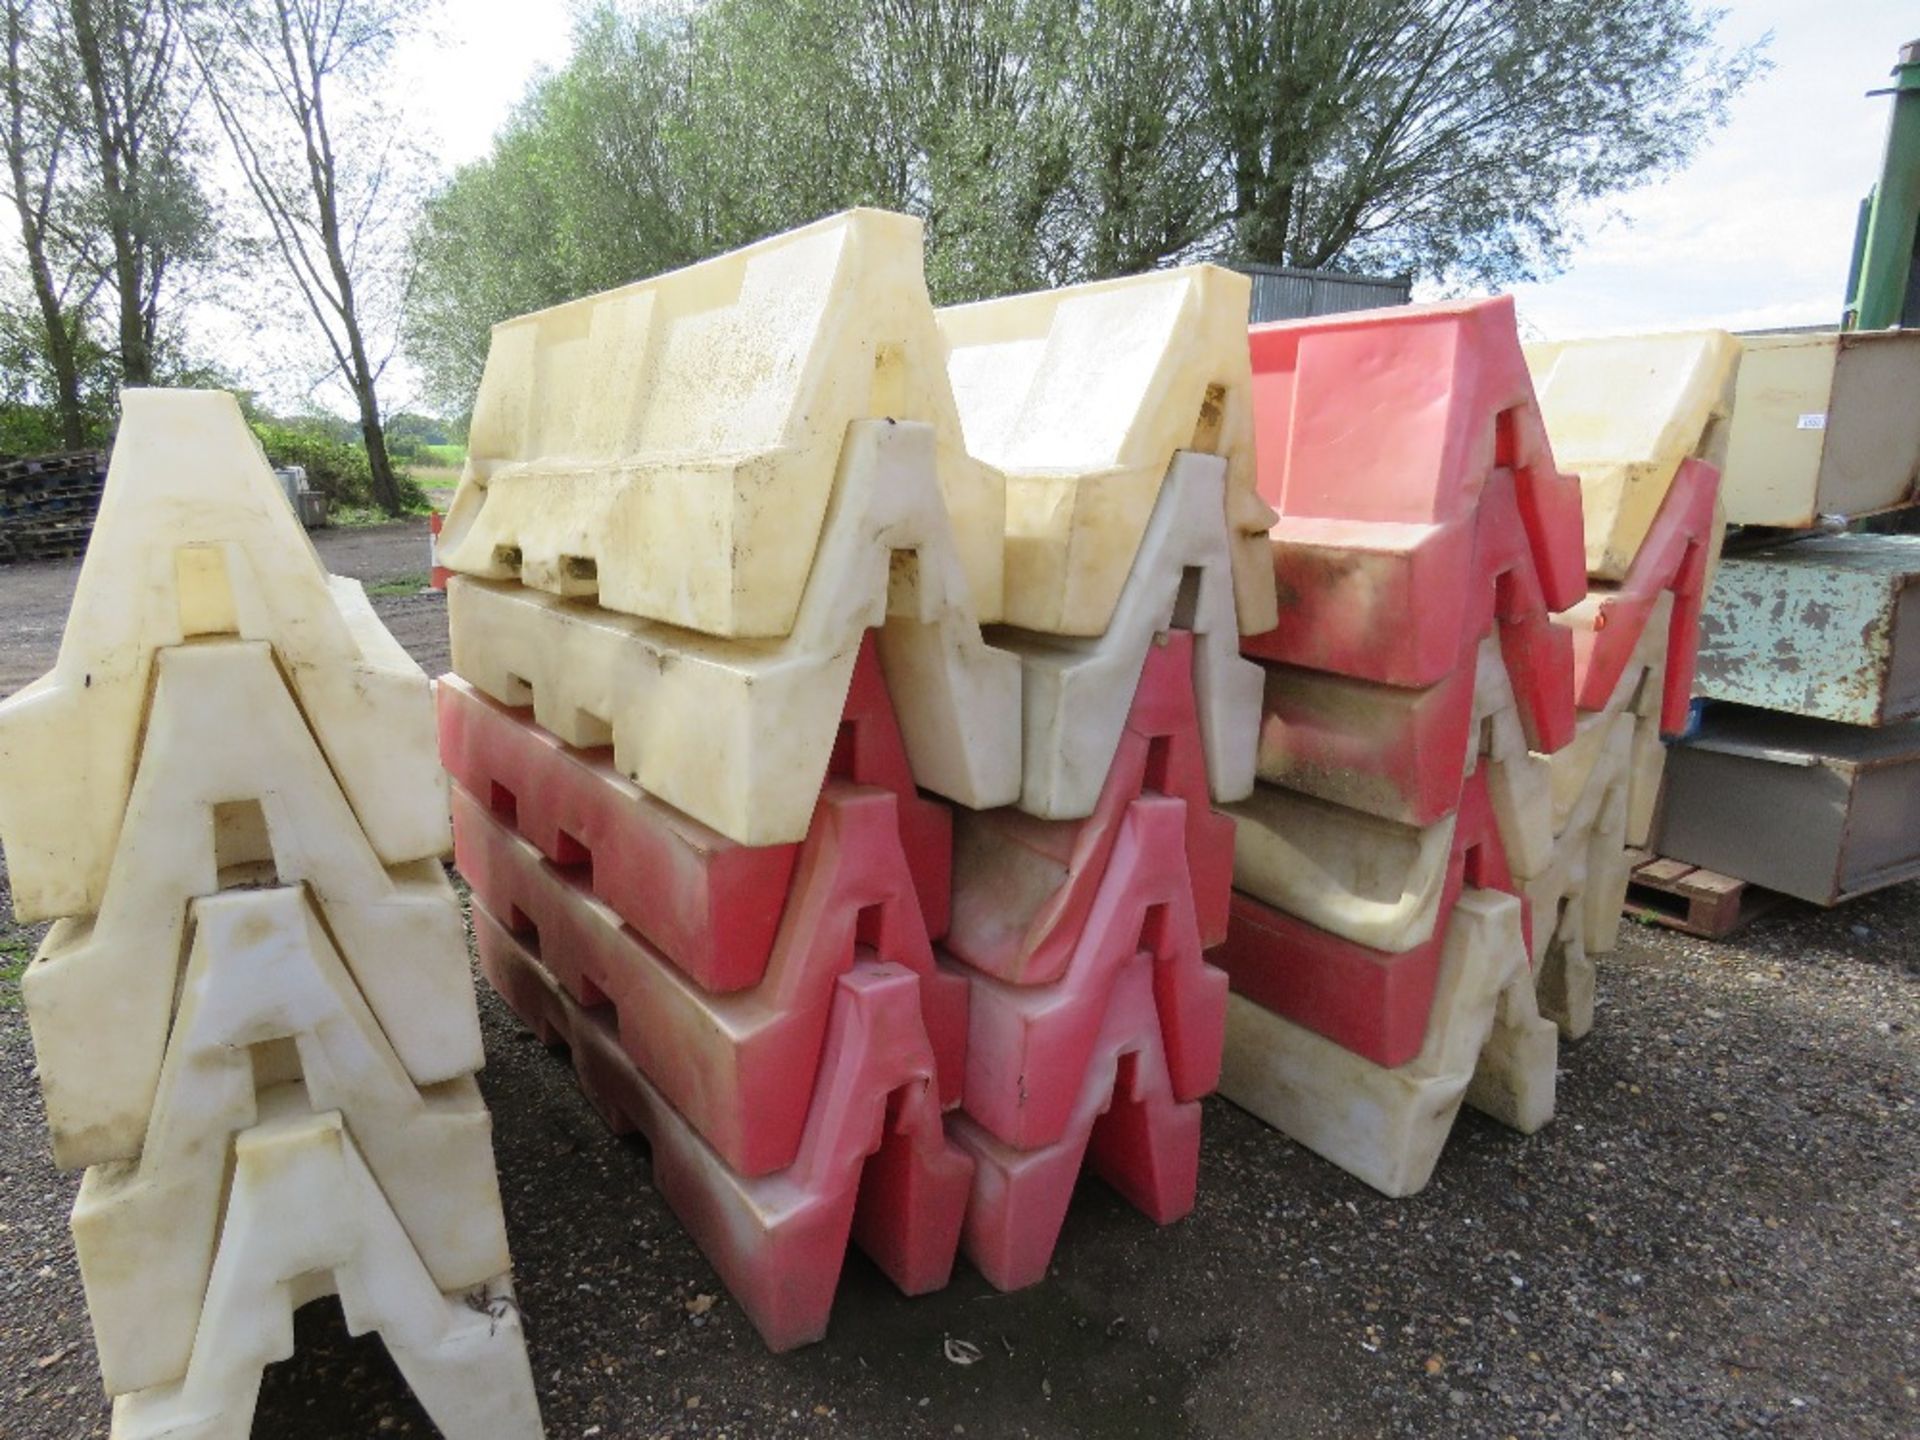 LARGE SIZED WATER FILLED PLASTIC BARRIERS, DIRECT FROM SITE CLEARANCE.